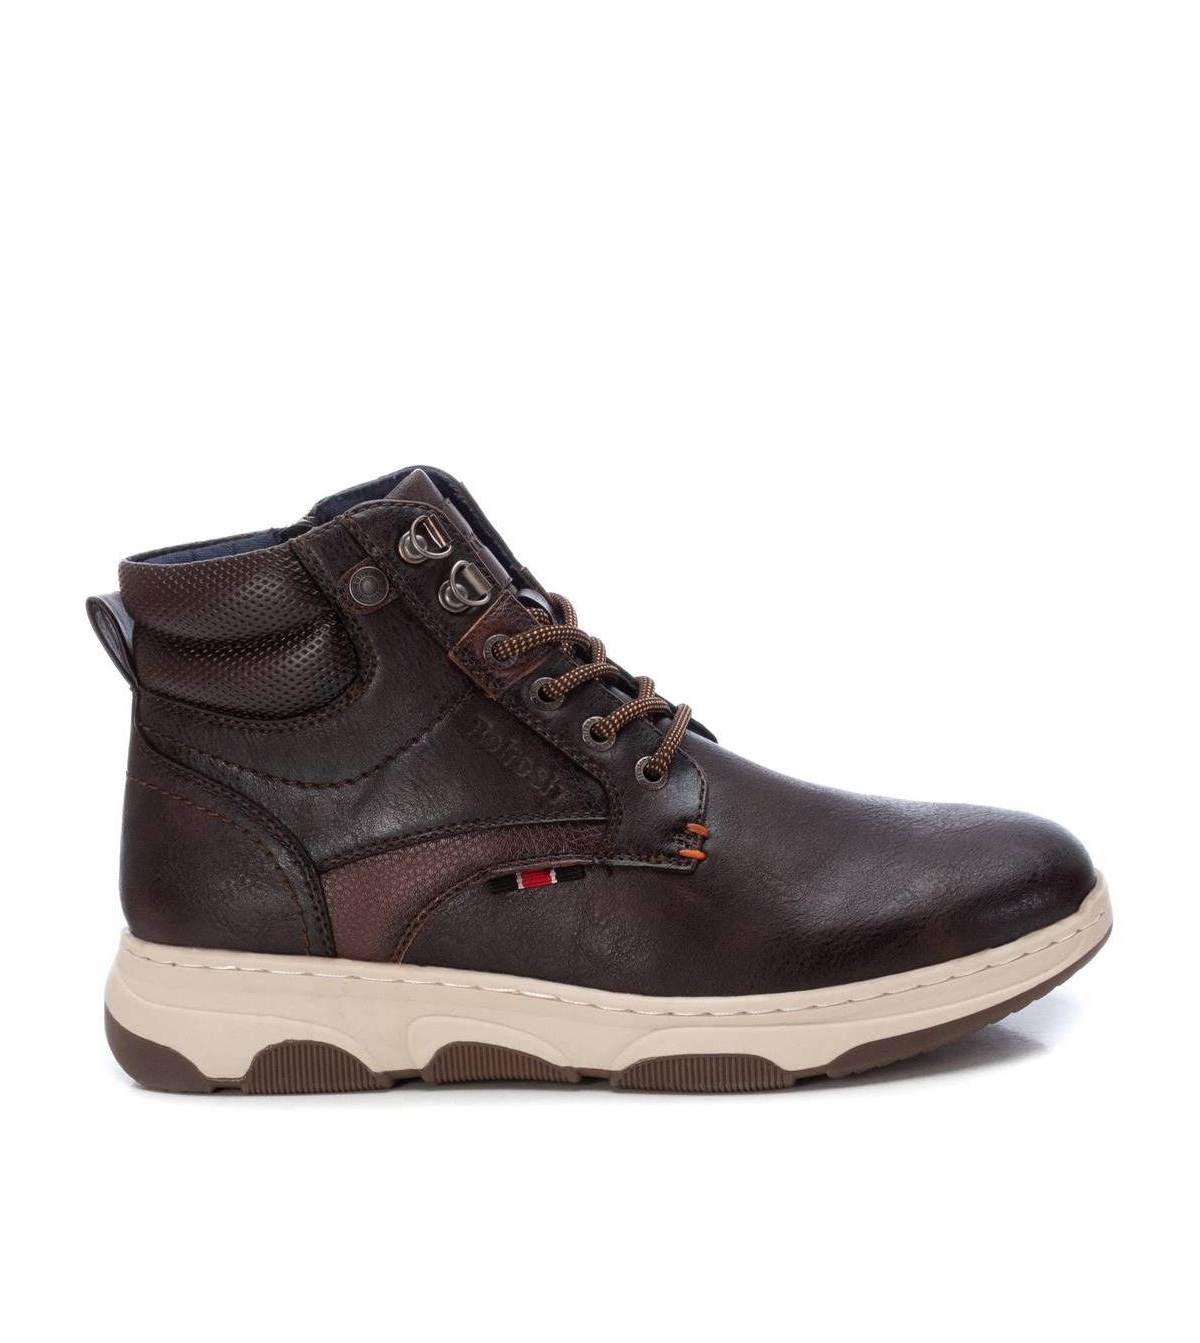 Men's Ankle Boots By Xti - Chocolate